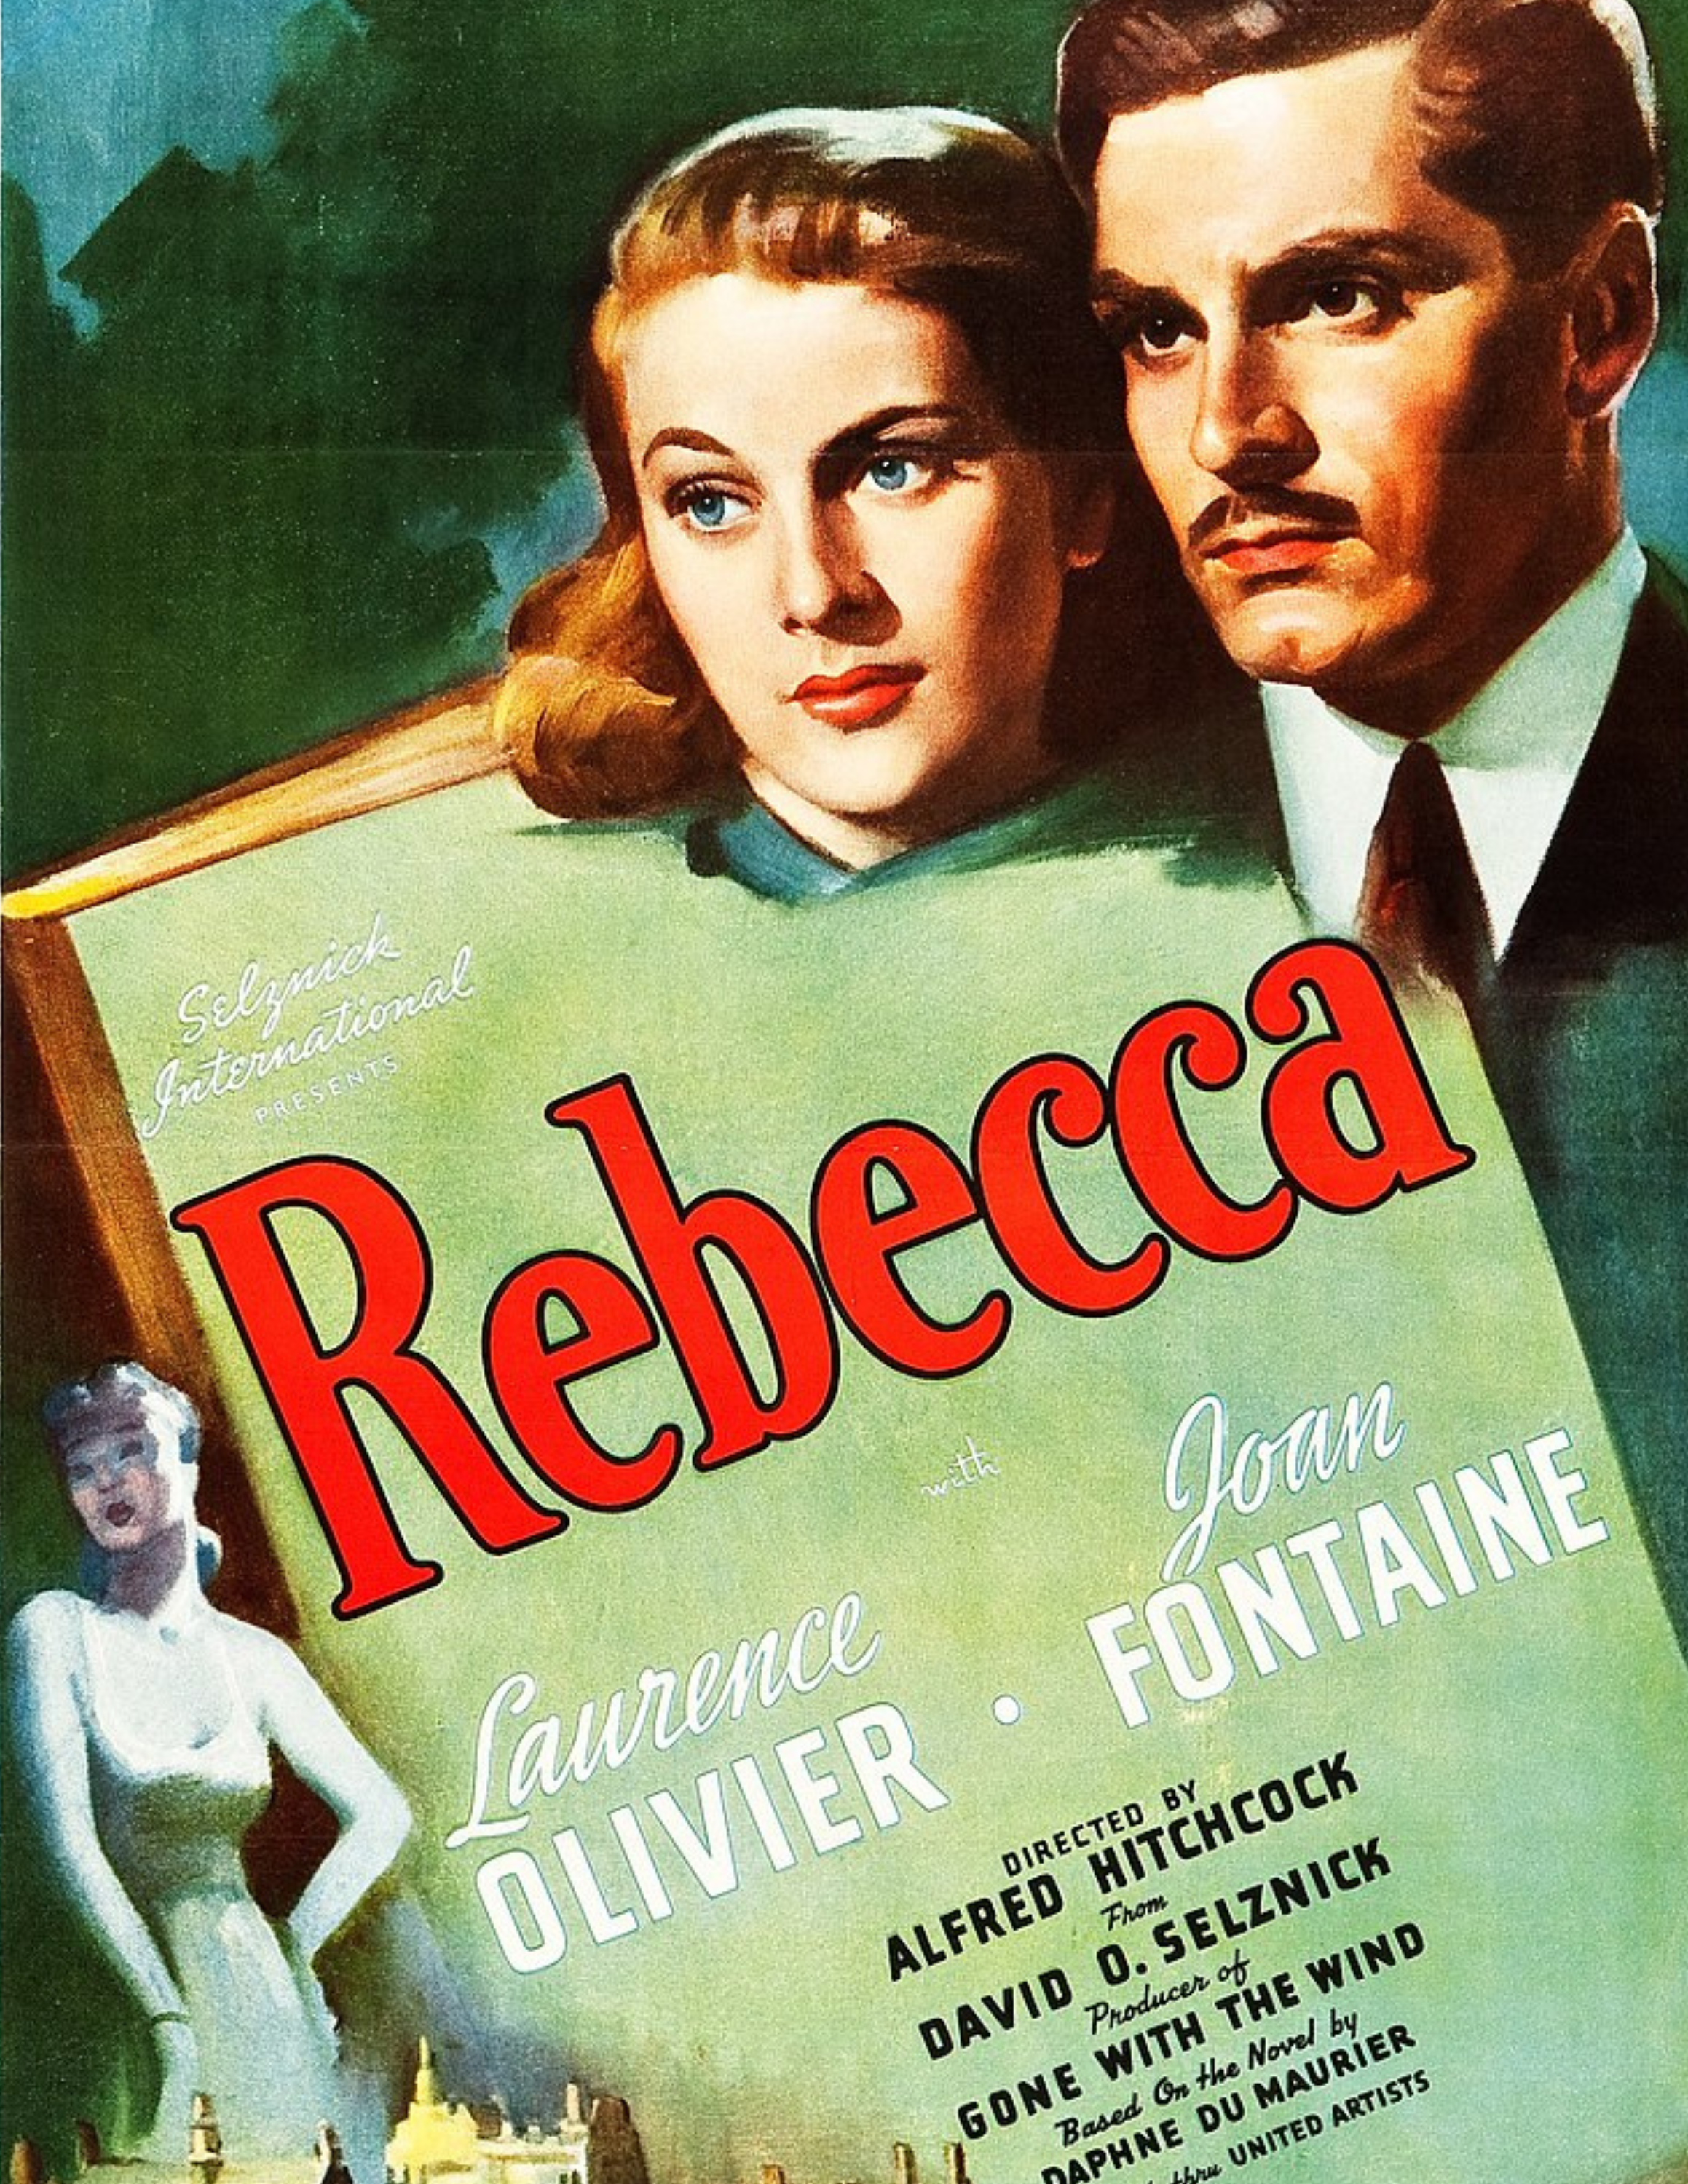 Rebecca Hitchcock Lawrence Olivier and Joan Fontaine Woman and man looking at woman in ballgown